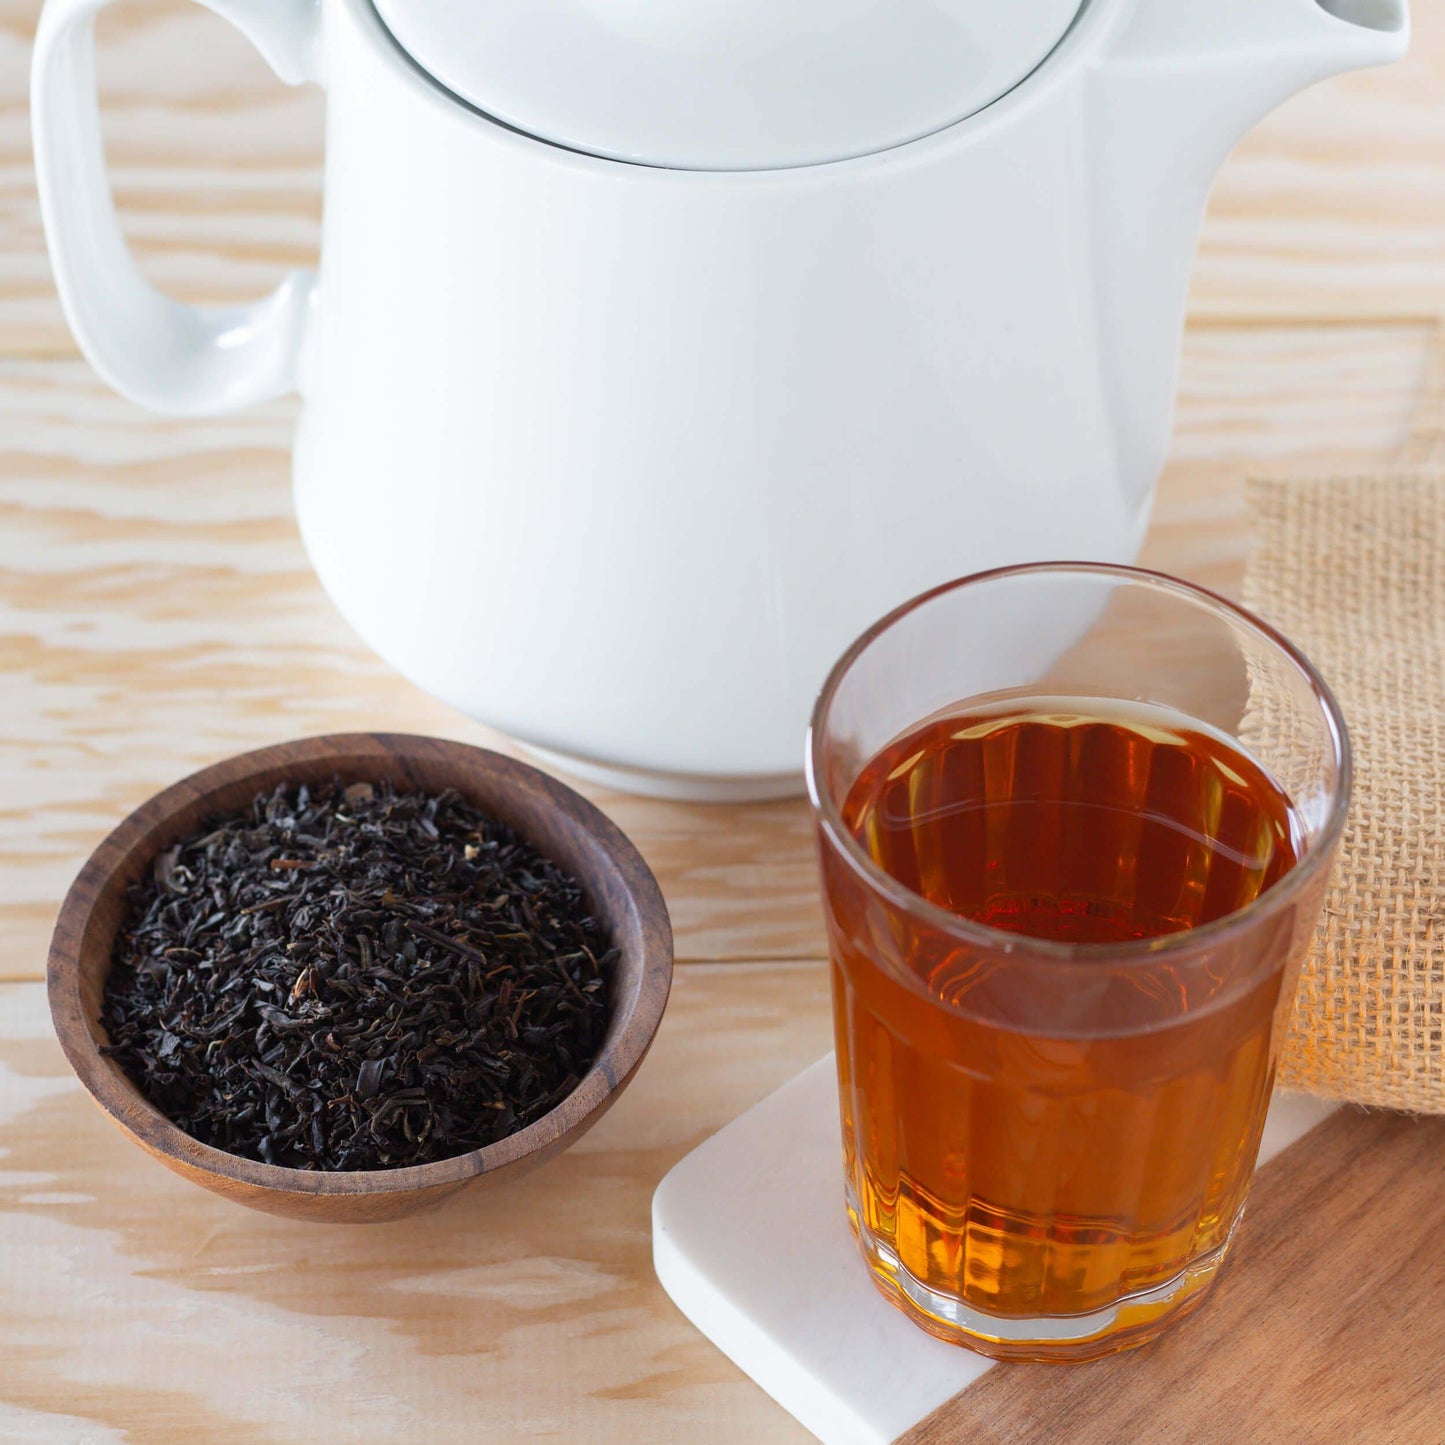 Nilgiri Organic Black Tea shown as brewed tea in a glass, infront of a large white teapot, with a small wooden bowl of loose tea leaves nearby